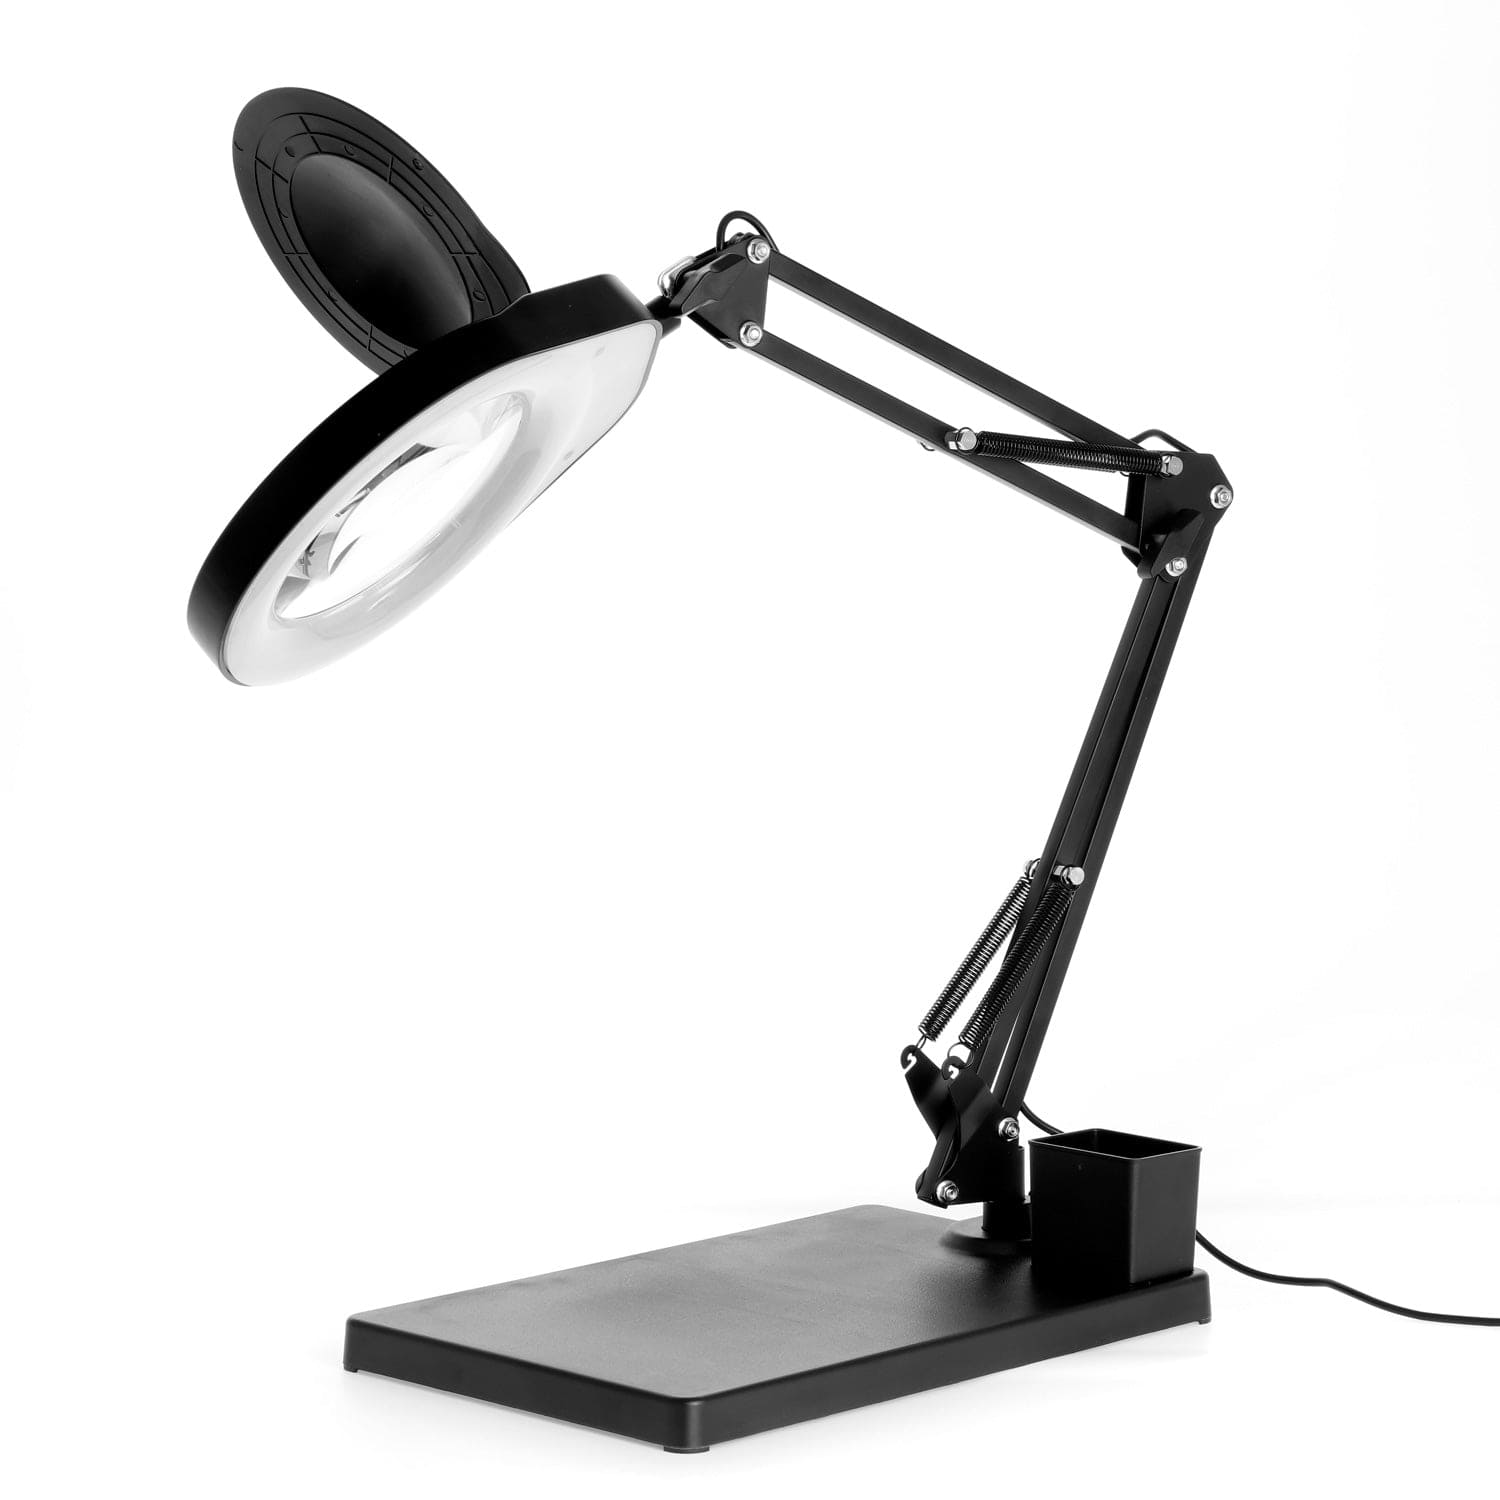 Amscope - Tabletop Magnifying Lamp - MAGLED-80-TT